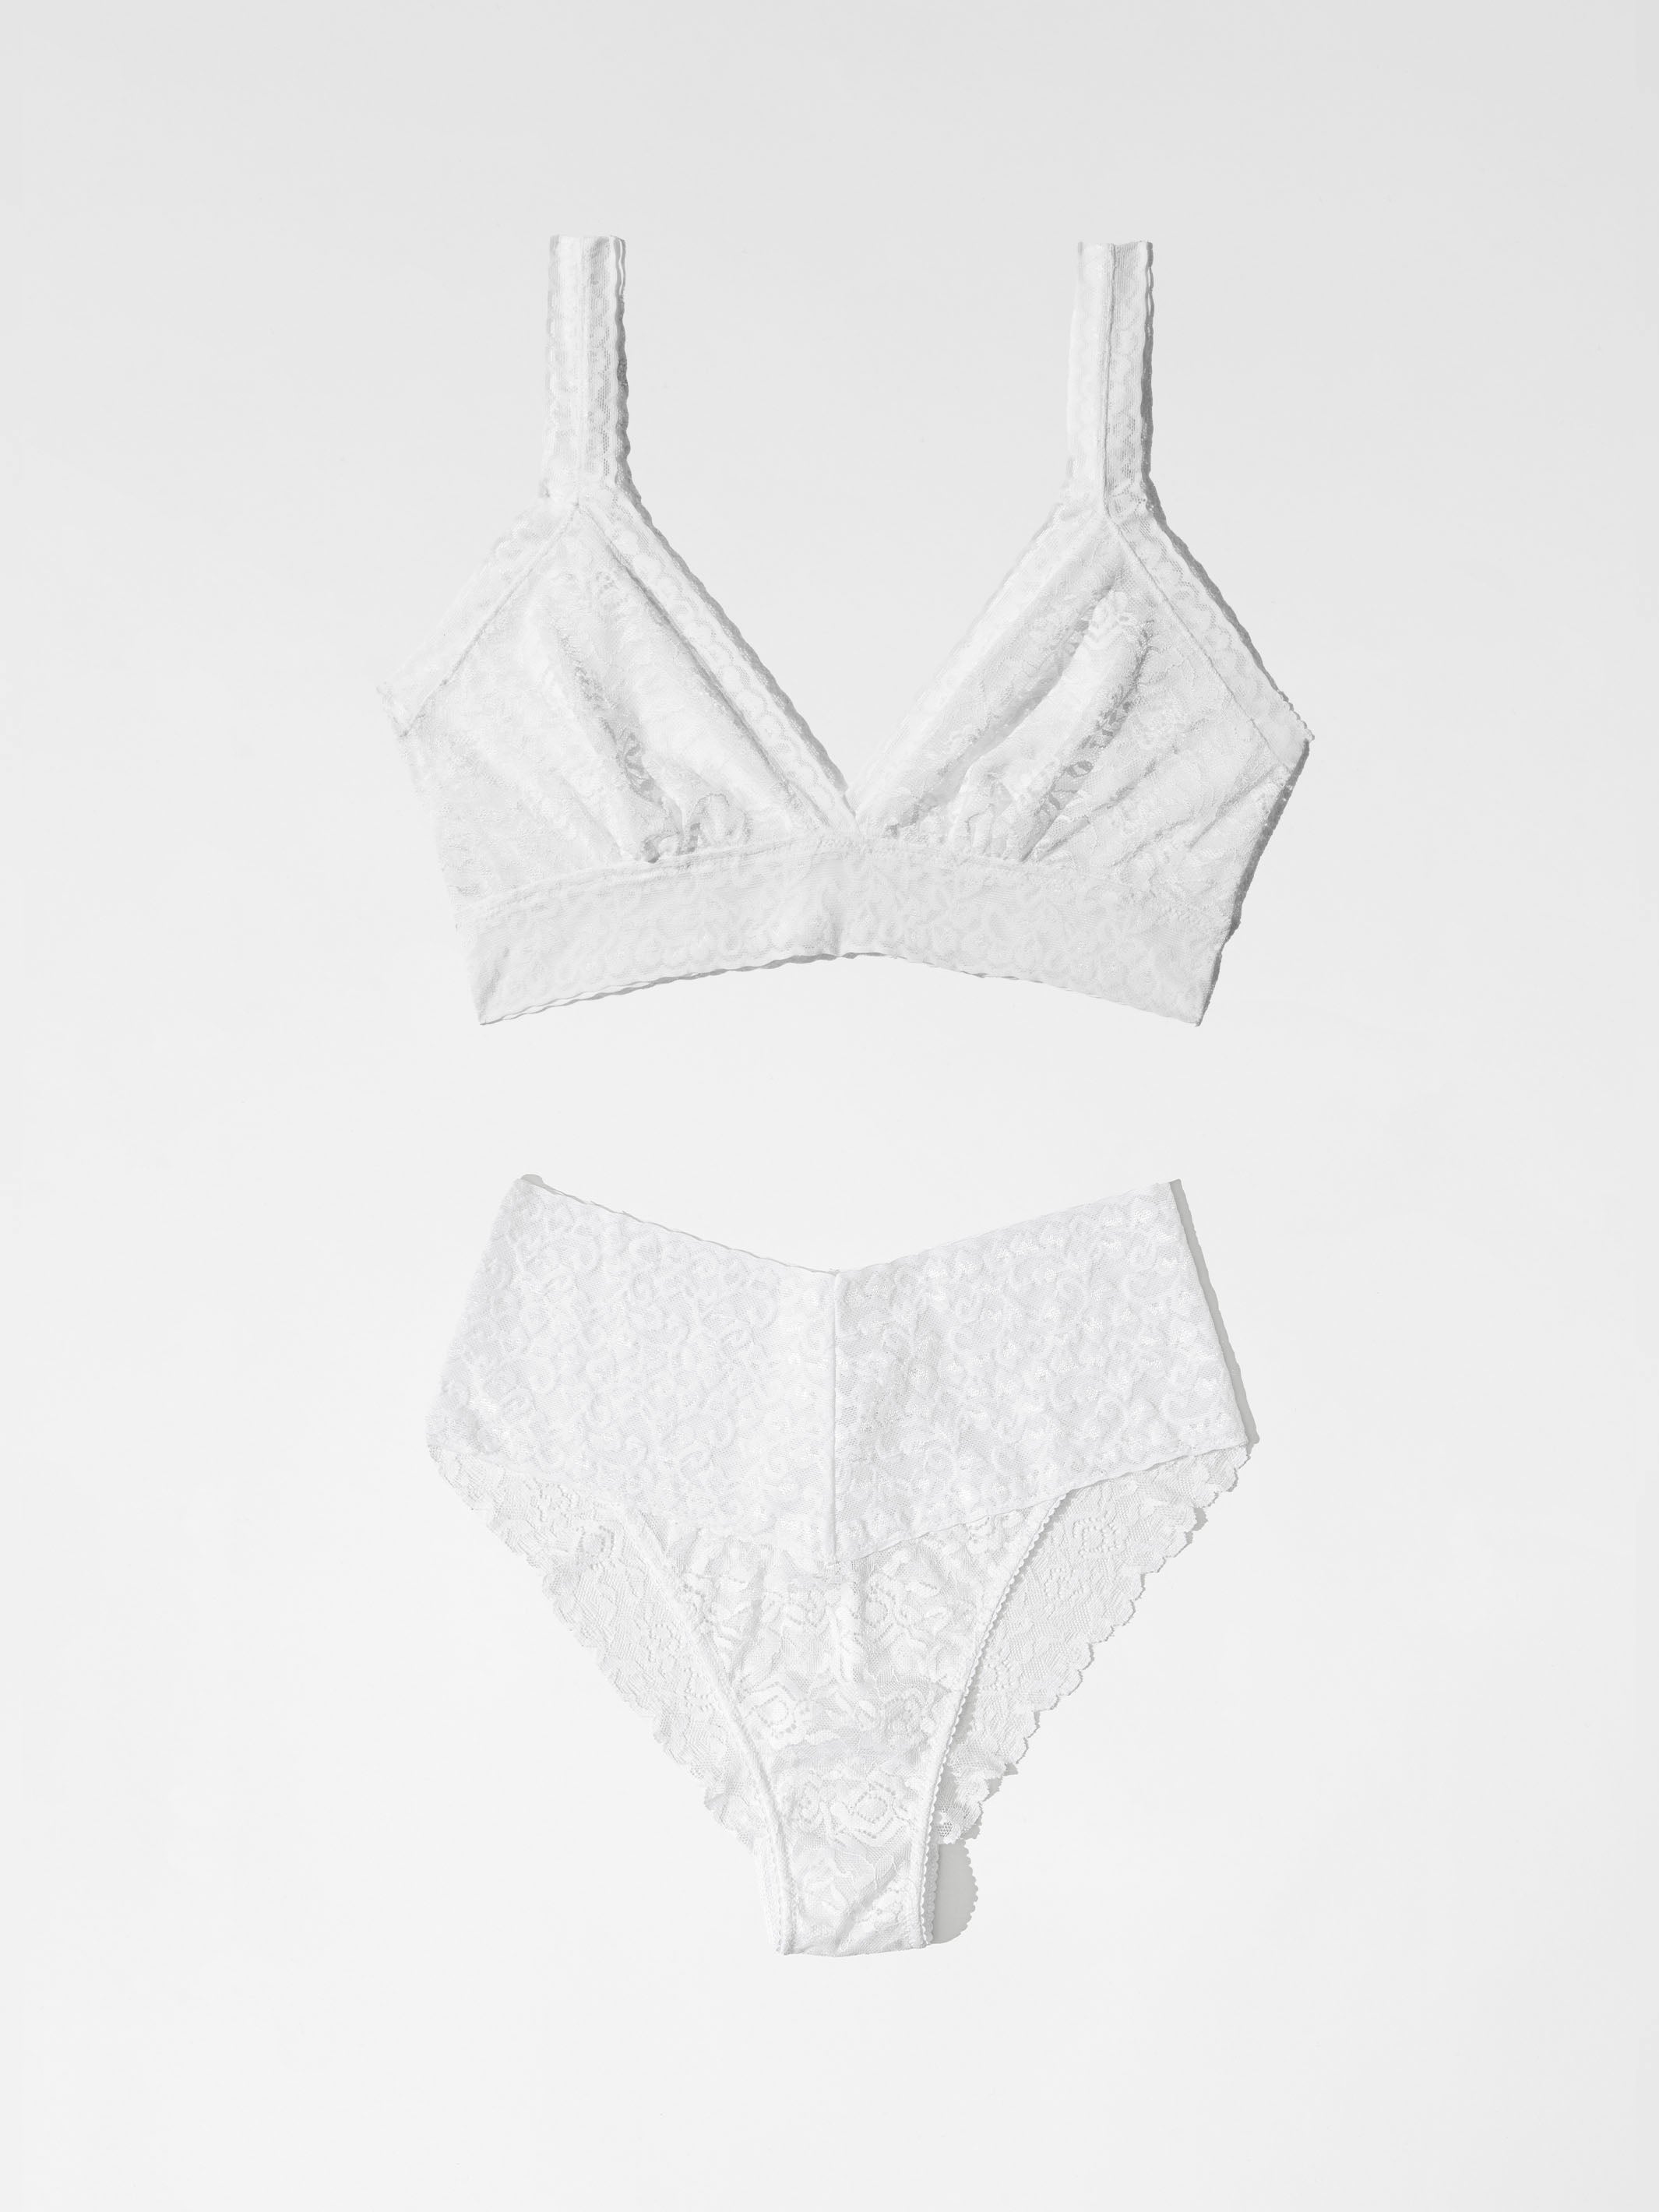 Irresistible Lace and Lines Bralette Lingerie Set – Yogasity